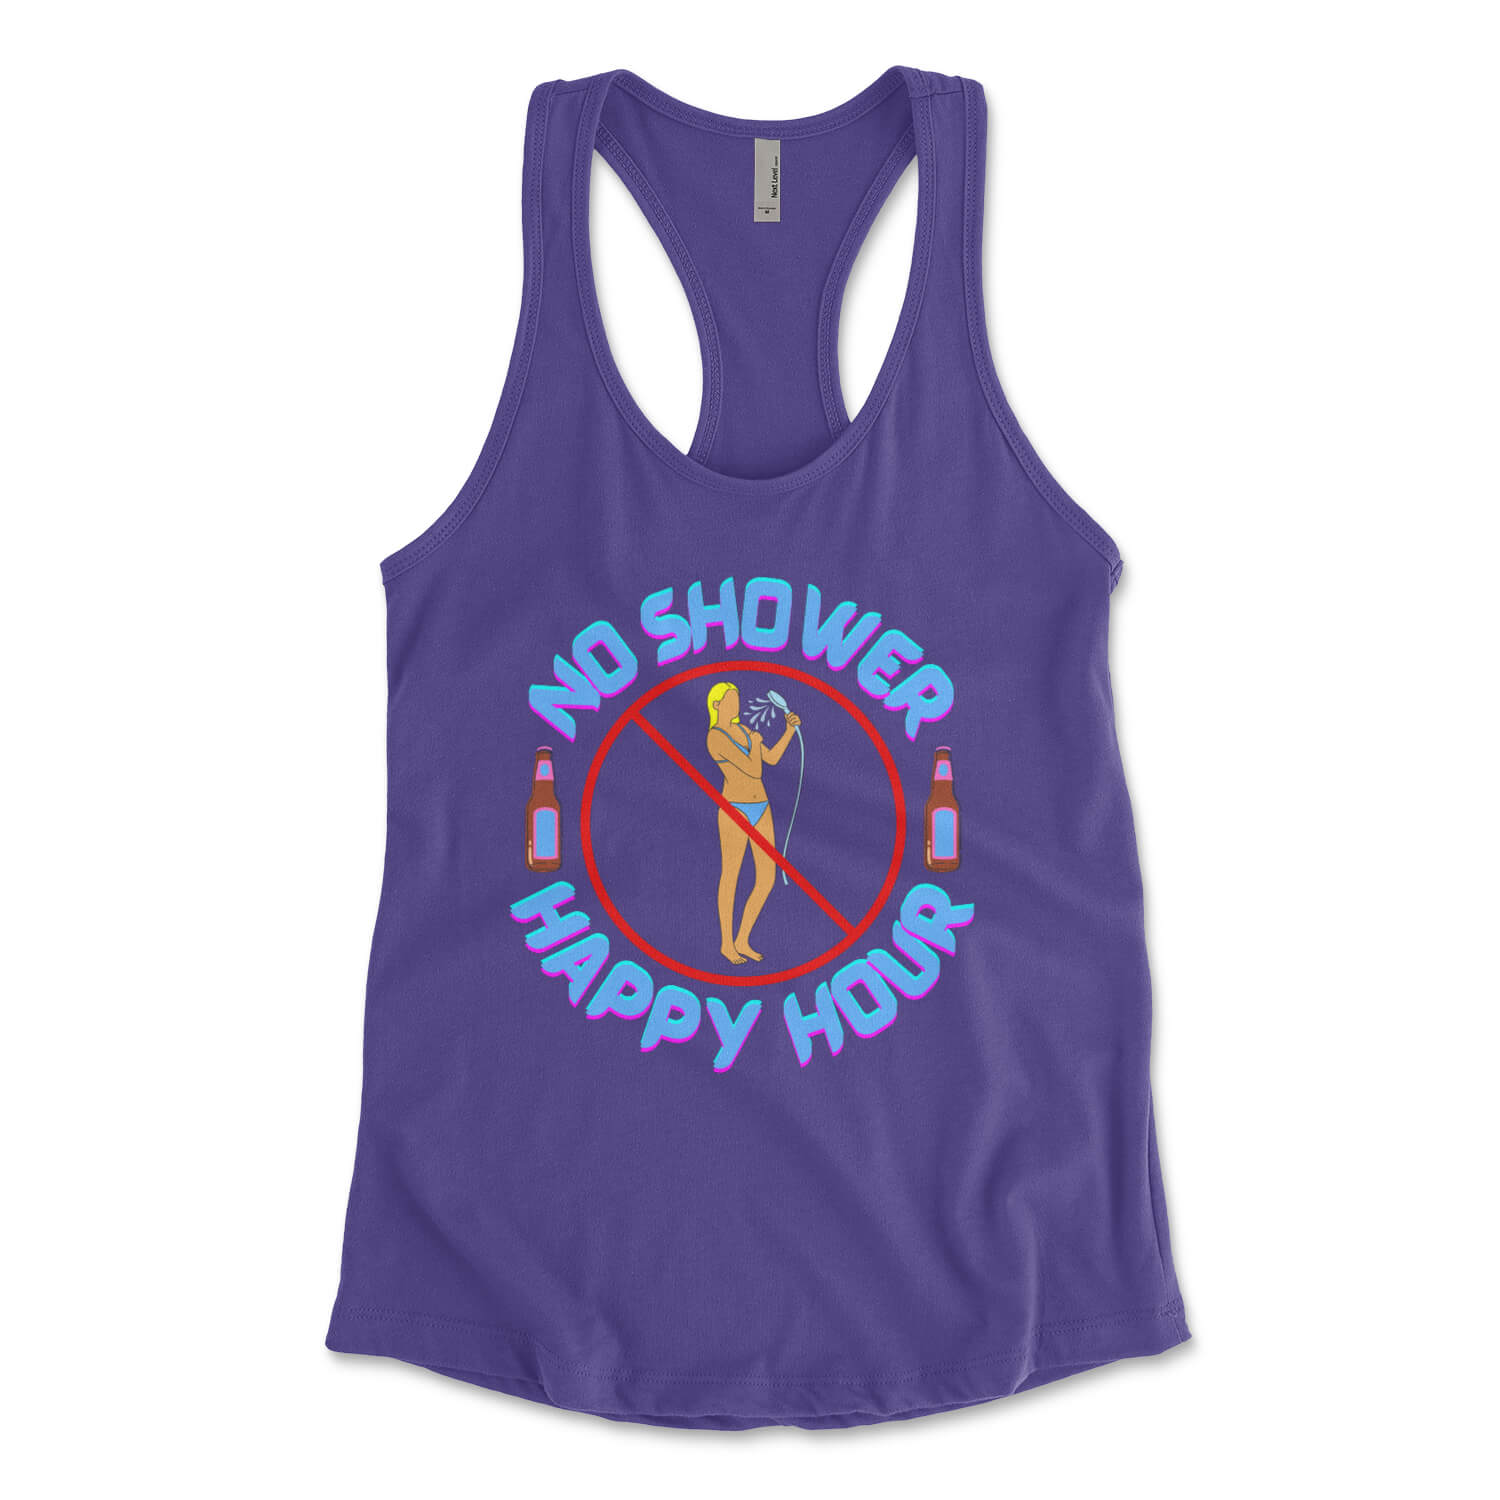 No shower happy hour sea isle city new jersey purple womens tank top Phillygoat